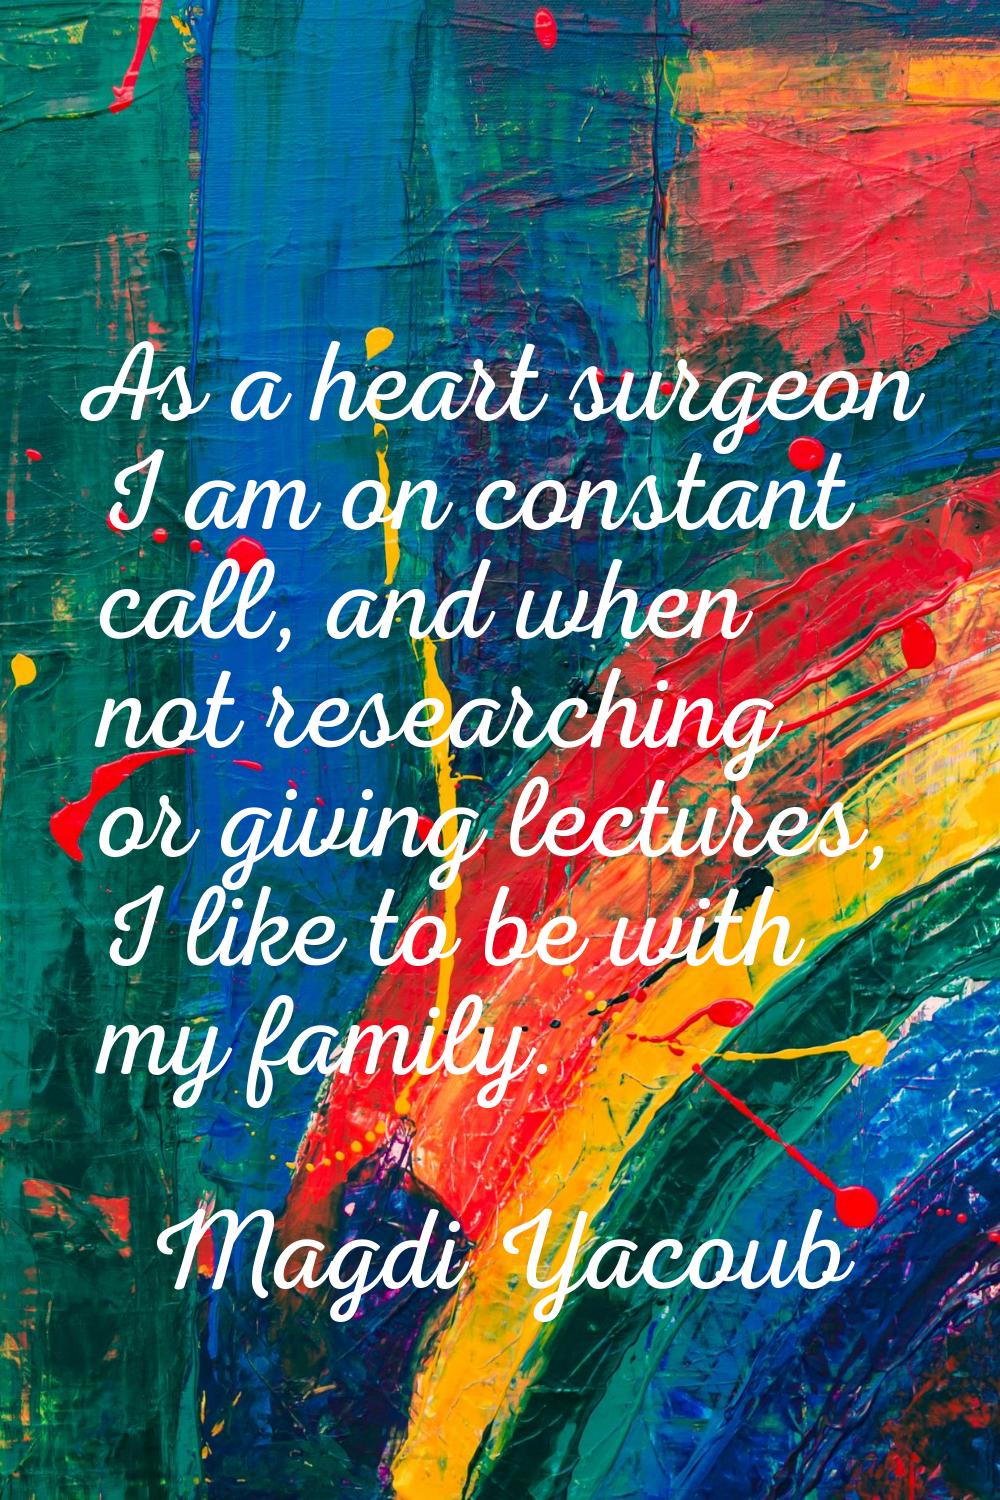 As a heart surgeon I am on constant call, and when not researching or giving lectures, I like to be